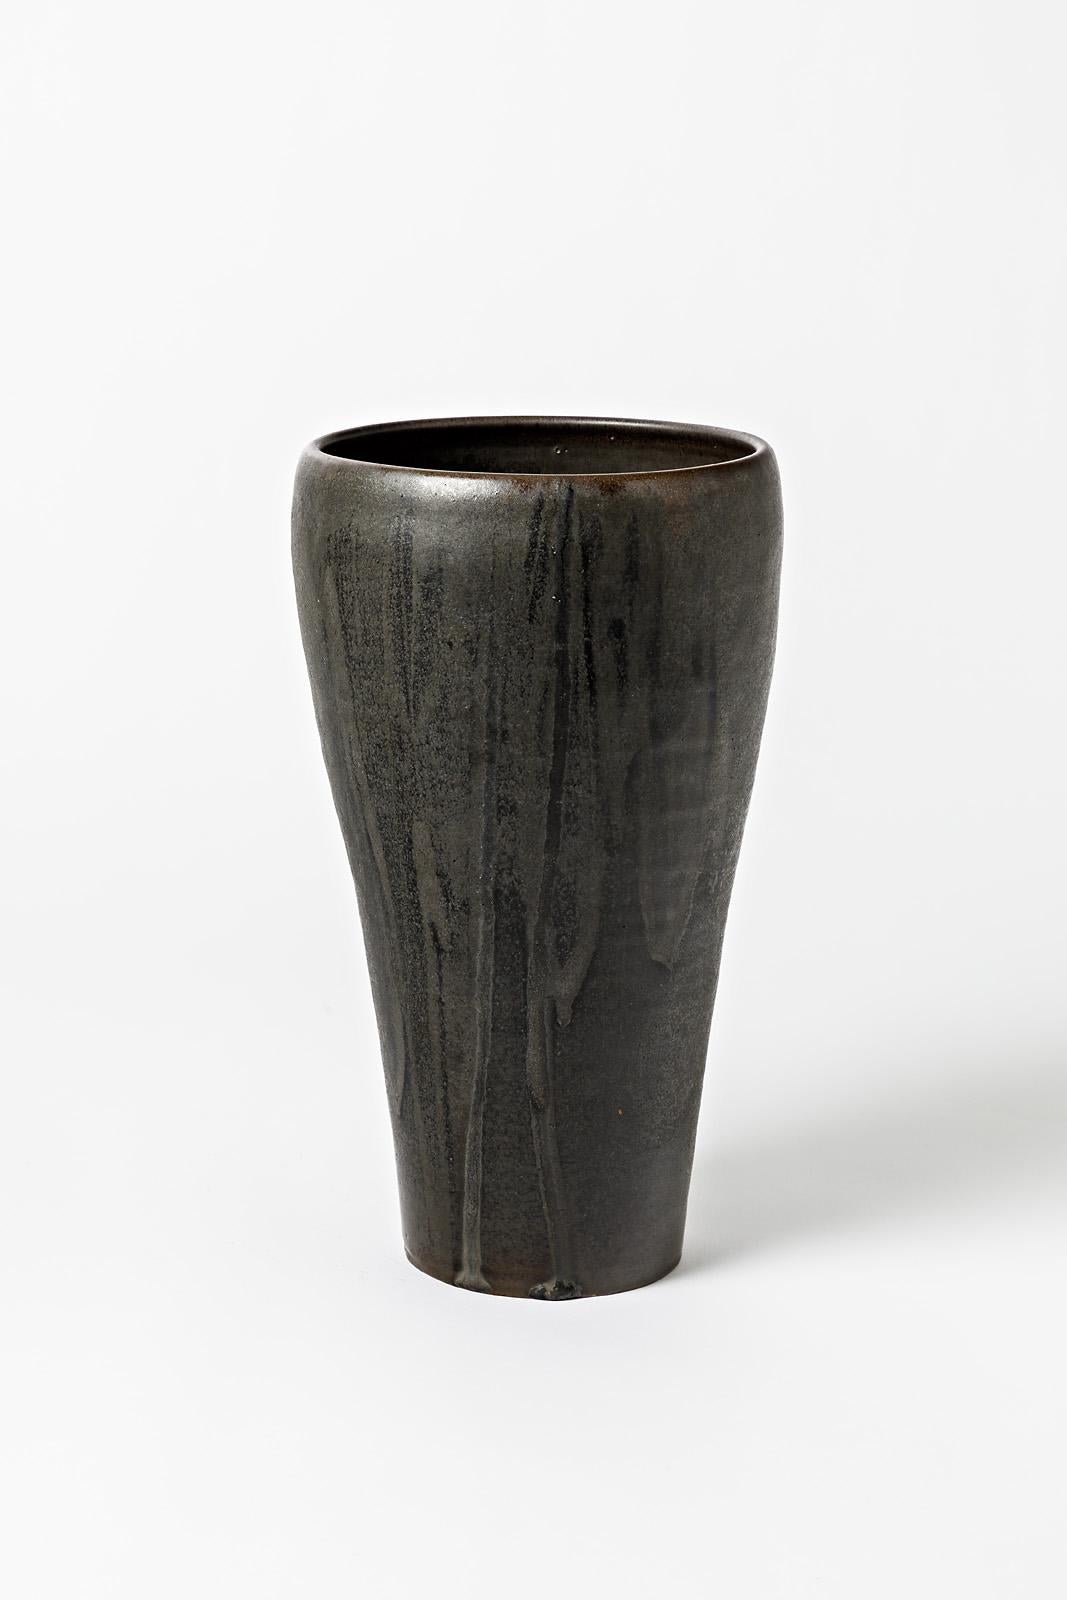 Matt and shiny black glazed stoneware vase by Roger Jacques.
Artist signature under the base « R. Jacques ». 
Circa 1960-1970.

H : 11.8’ x 6.5’ inches.